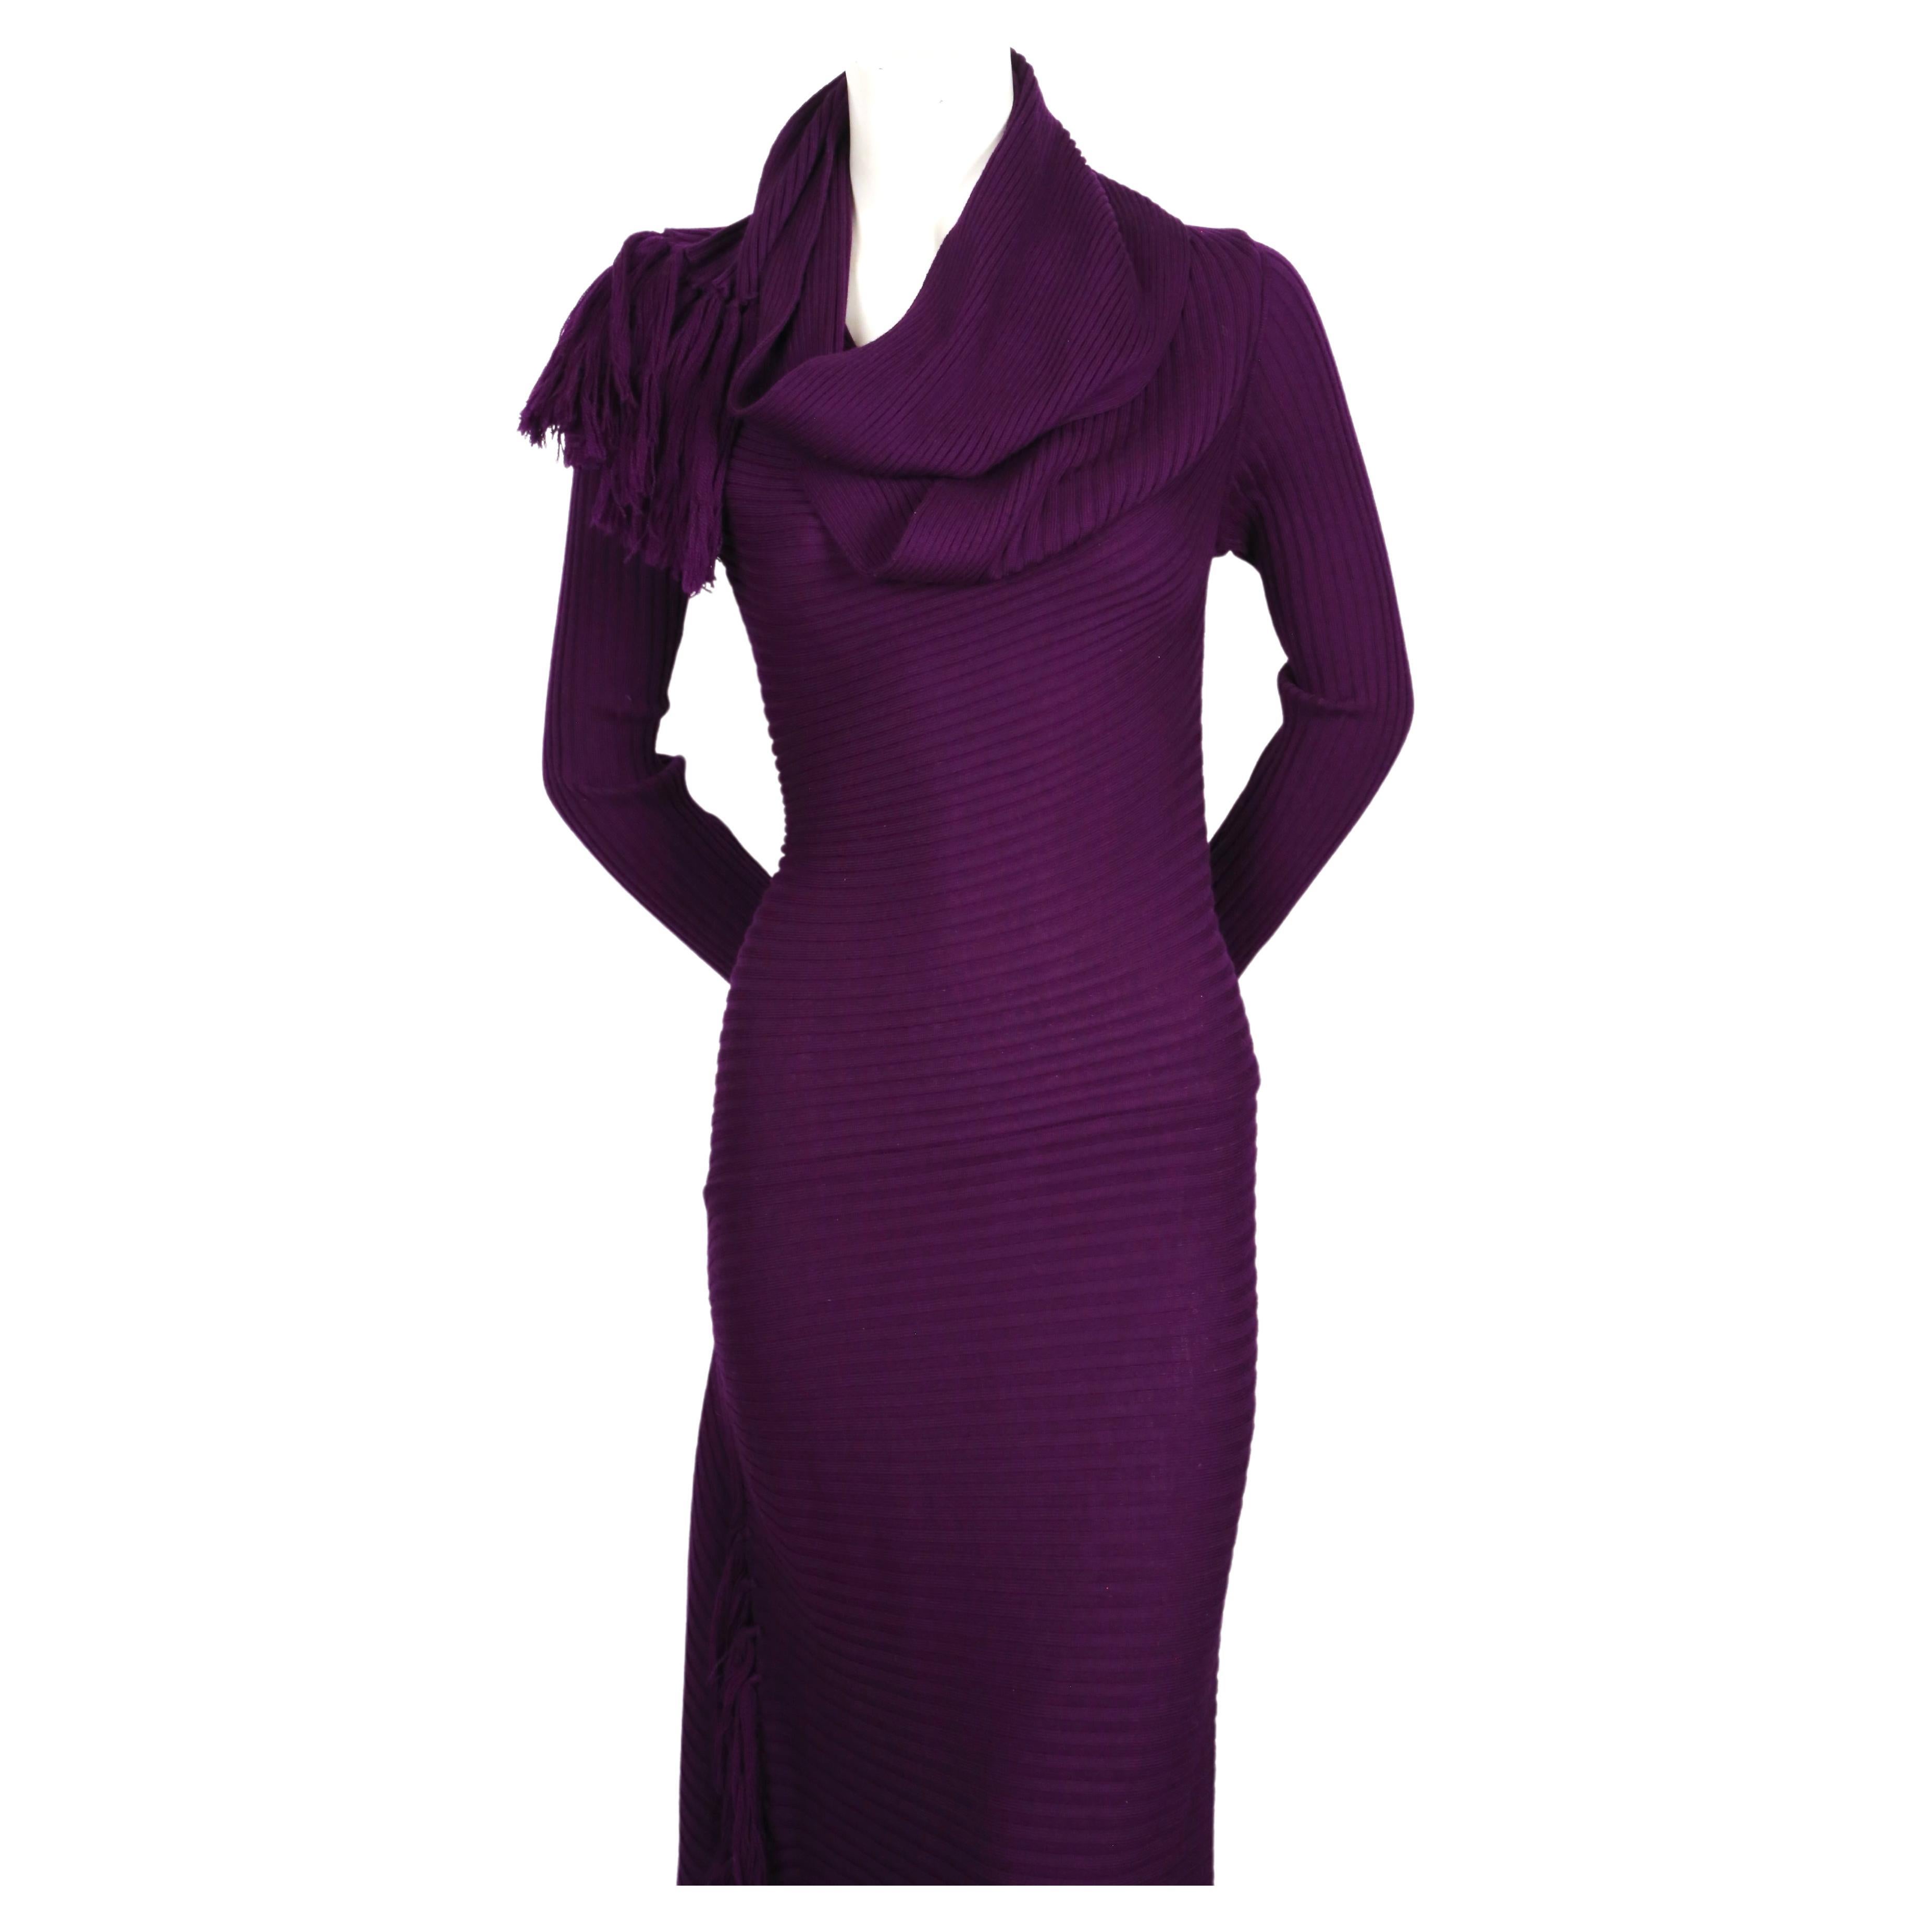  JEAN PAUL GAULTIER purple ribbed knit dress with scarf In Good Condition For Sale In San Fransisco, CA